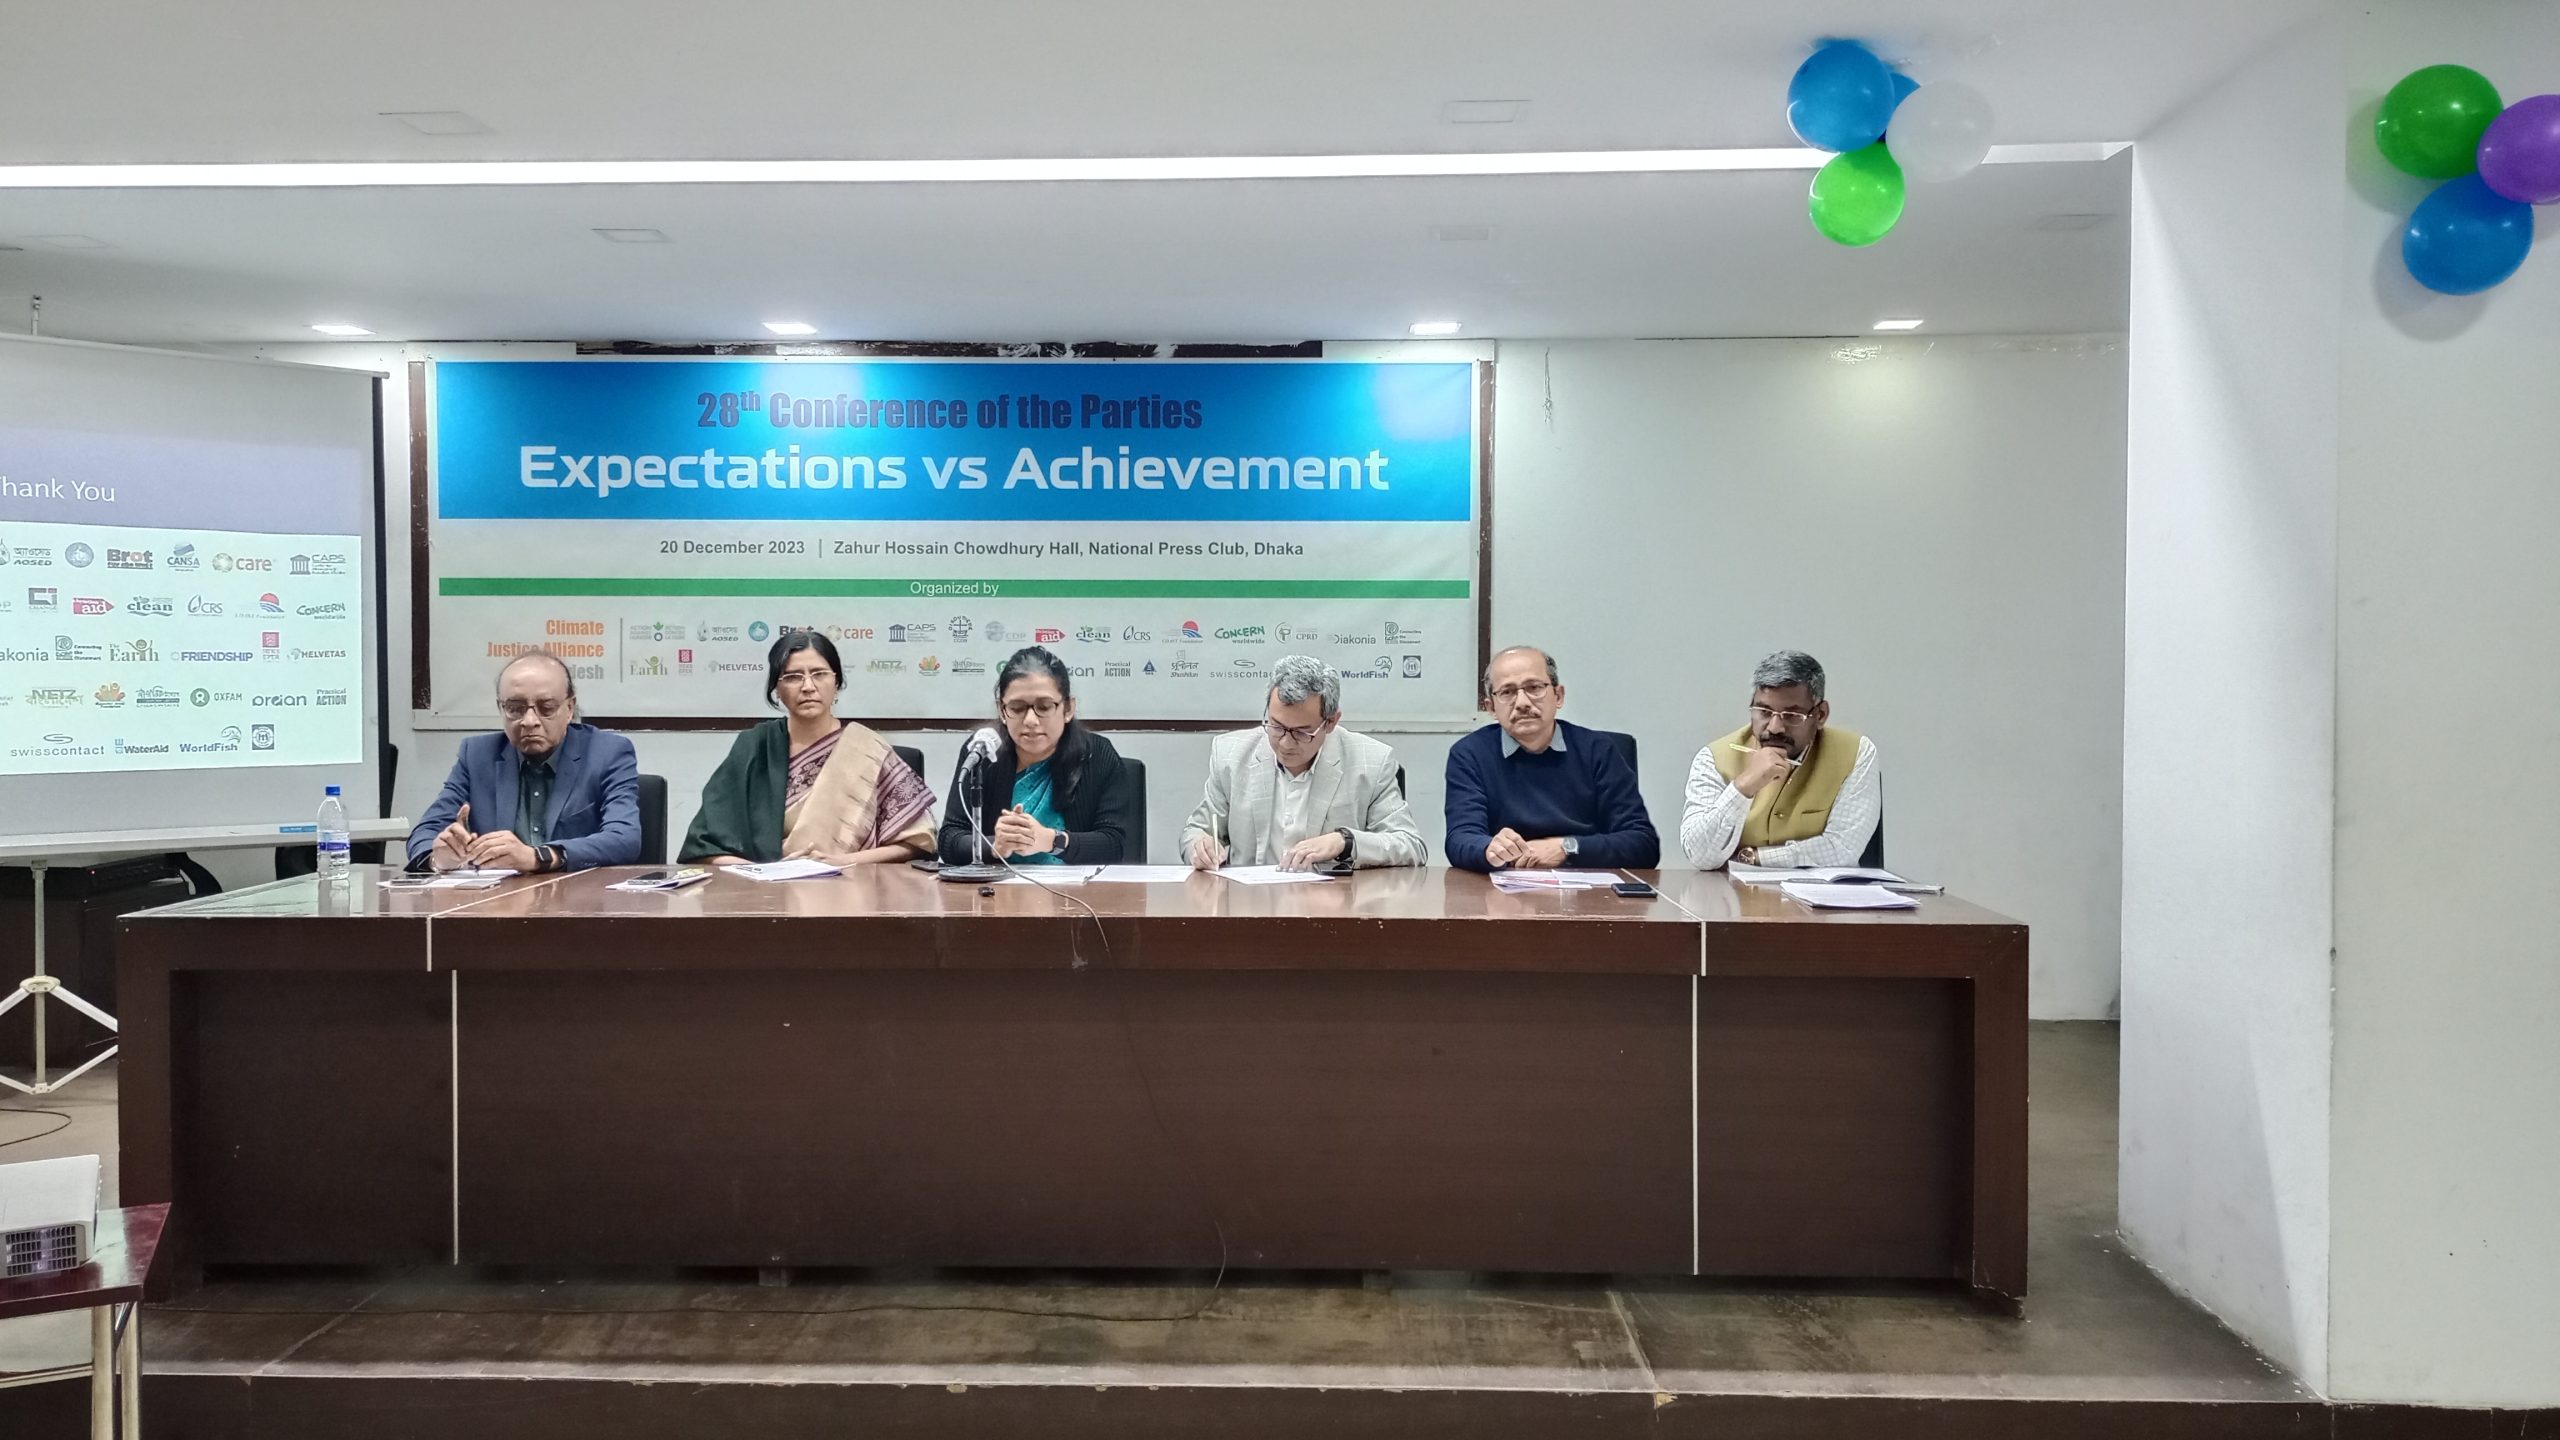 Climate Justice Alliance helds a press briefing titled ‘The 28th Conference of the Parties: Expectations vs Achievements’ at the National Press Club’